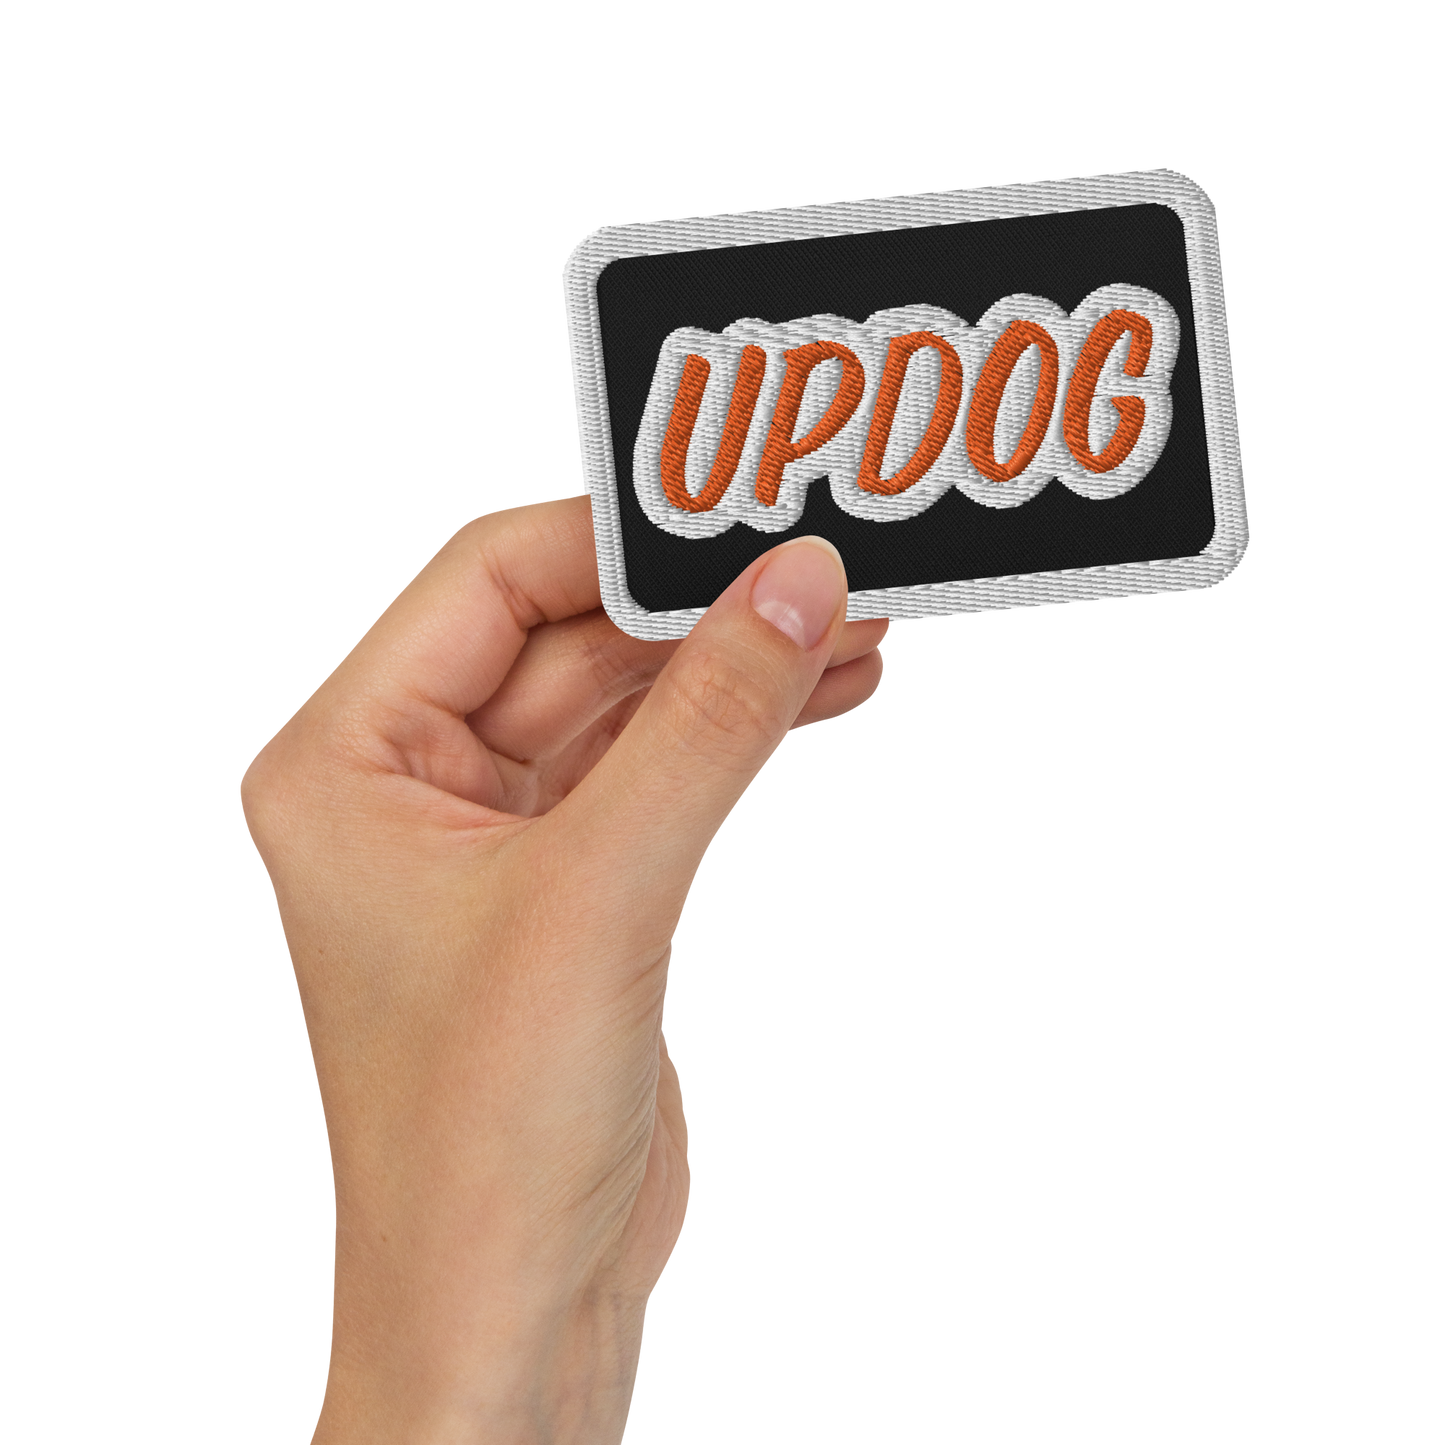 Updog Embroidered patch